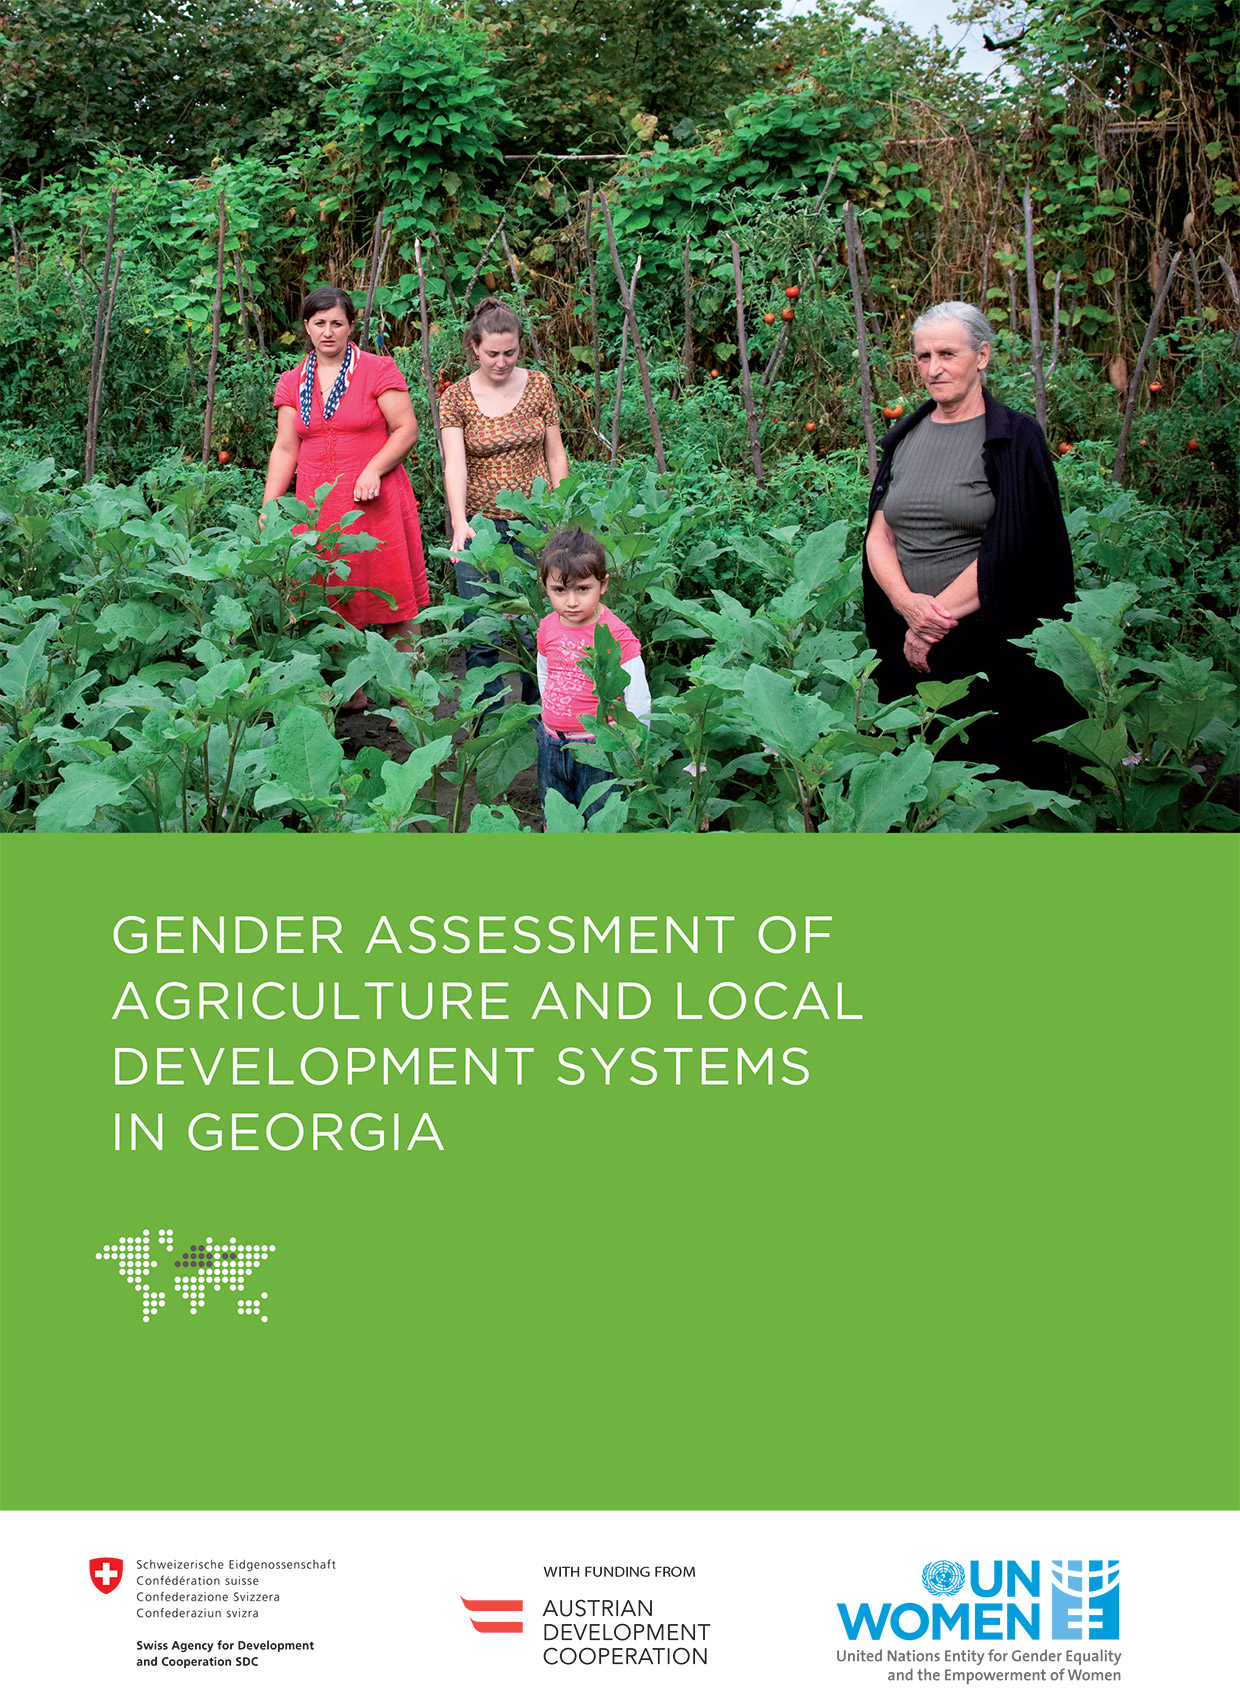 Gender assessment of agriculture and local development systems in Georgia